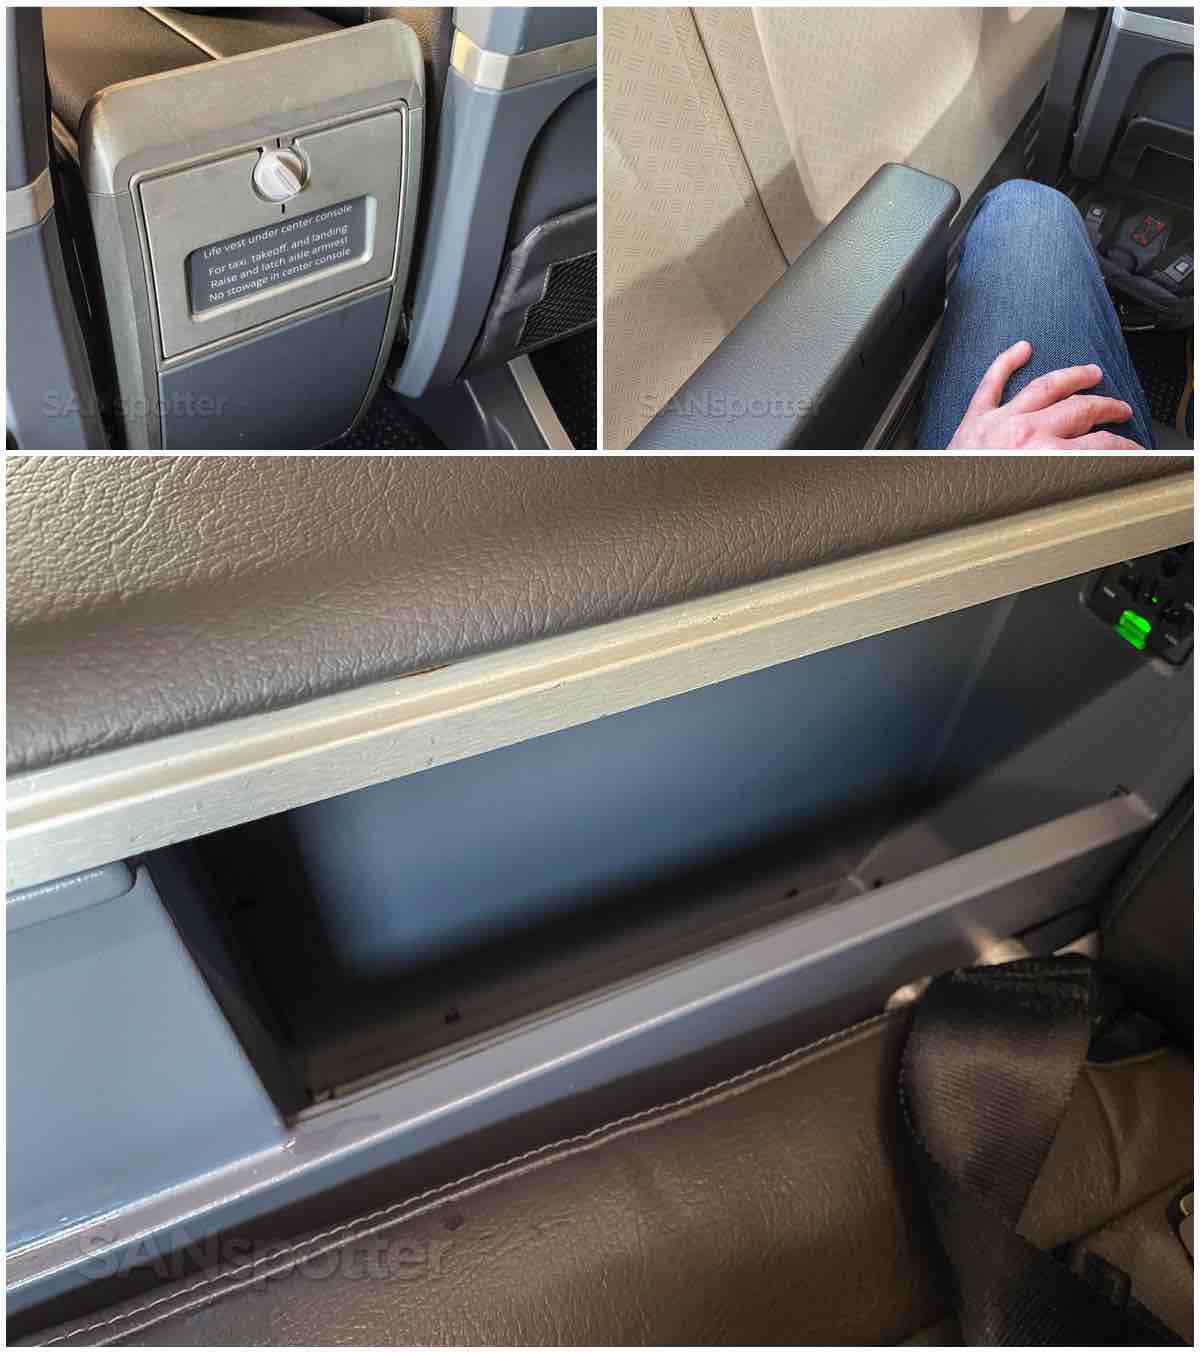 American Airlines 737-800 first class seat features